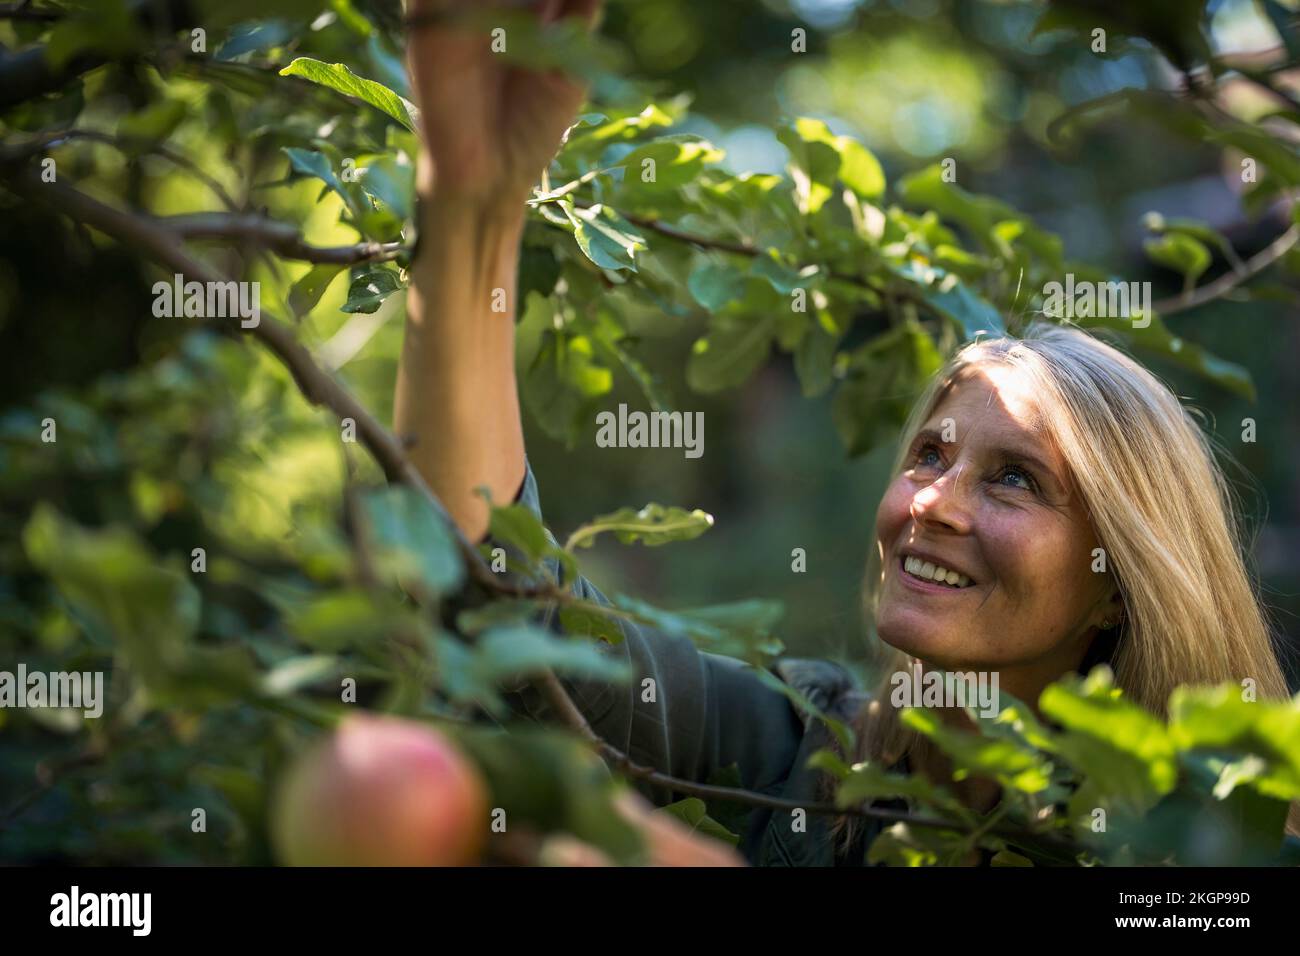 Happy woman with blond hair plucking fruit from tree in garden Stock Photo